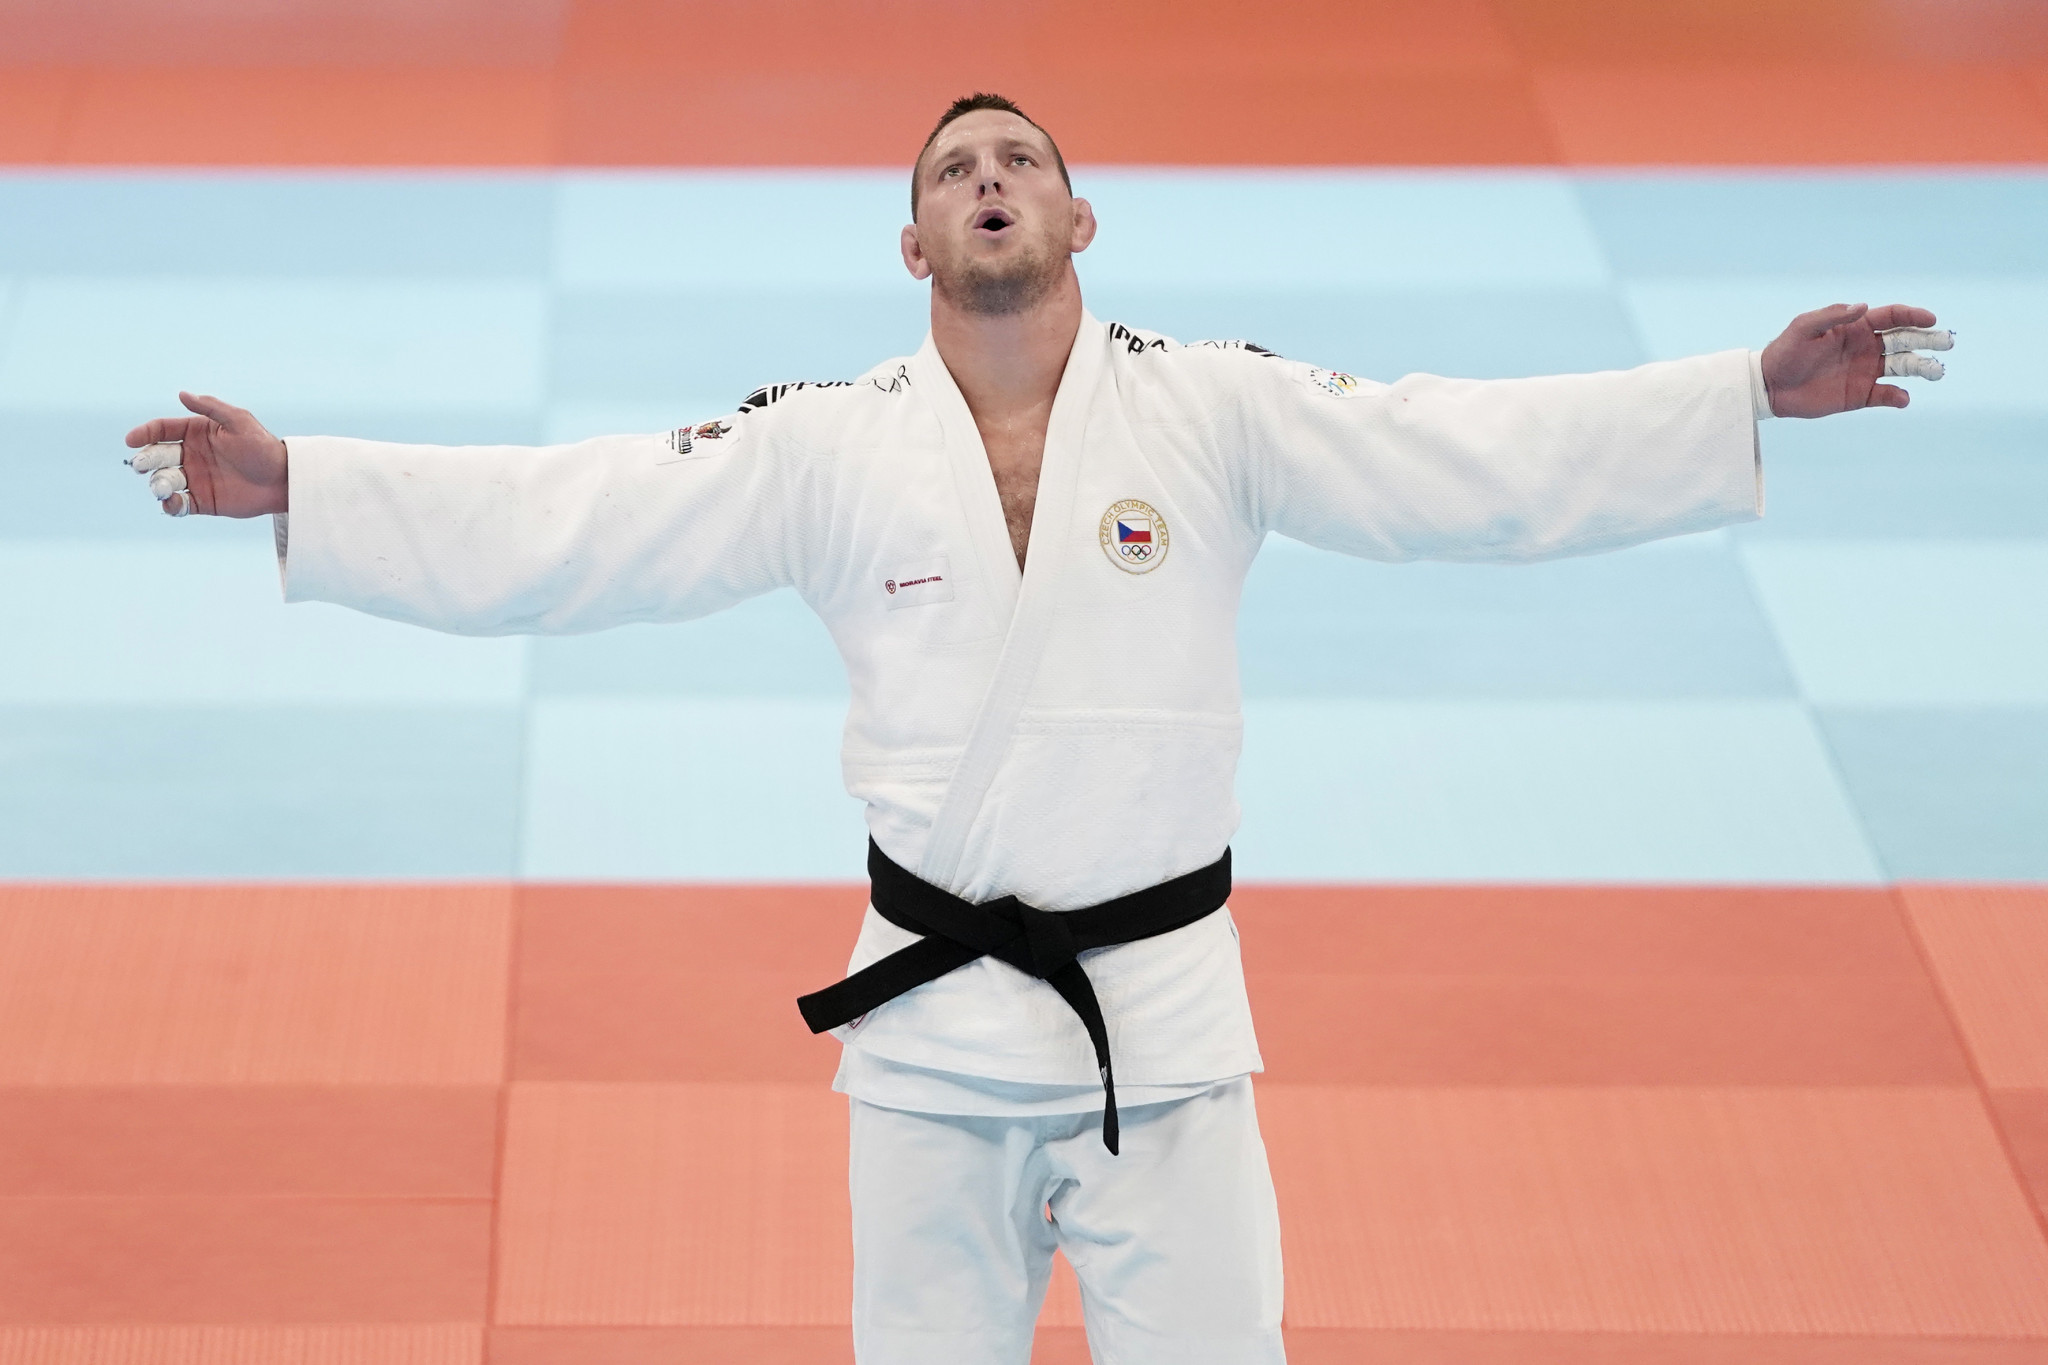 Krpálek becomes two-weight IJF world champion as Sone wins home gold